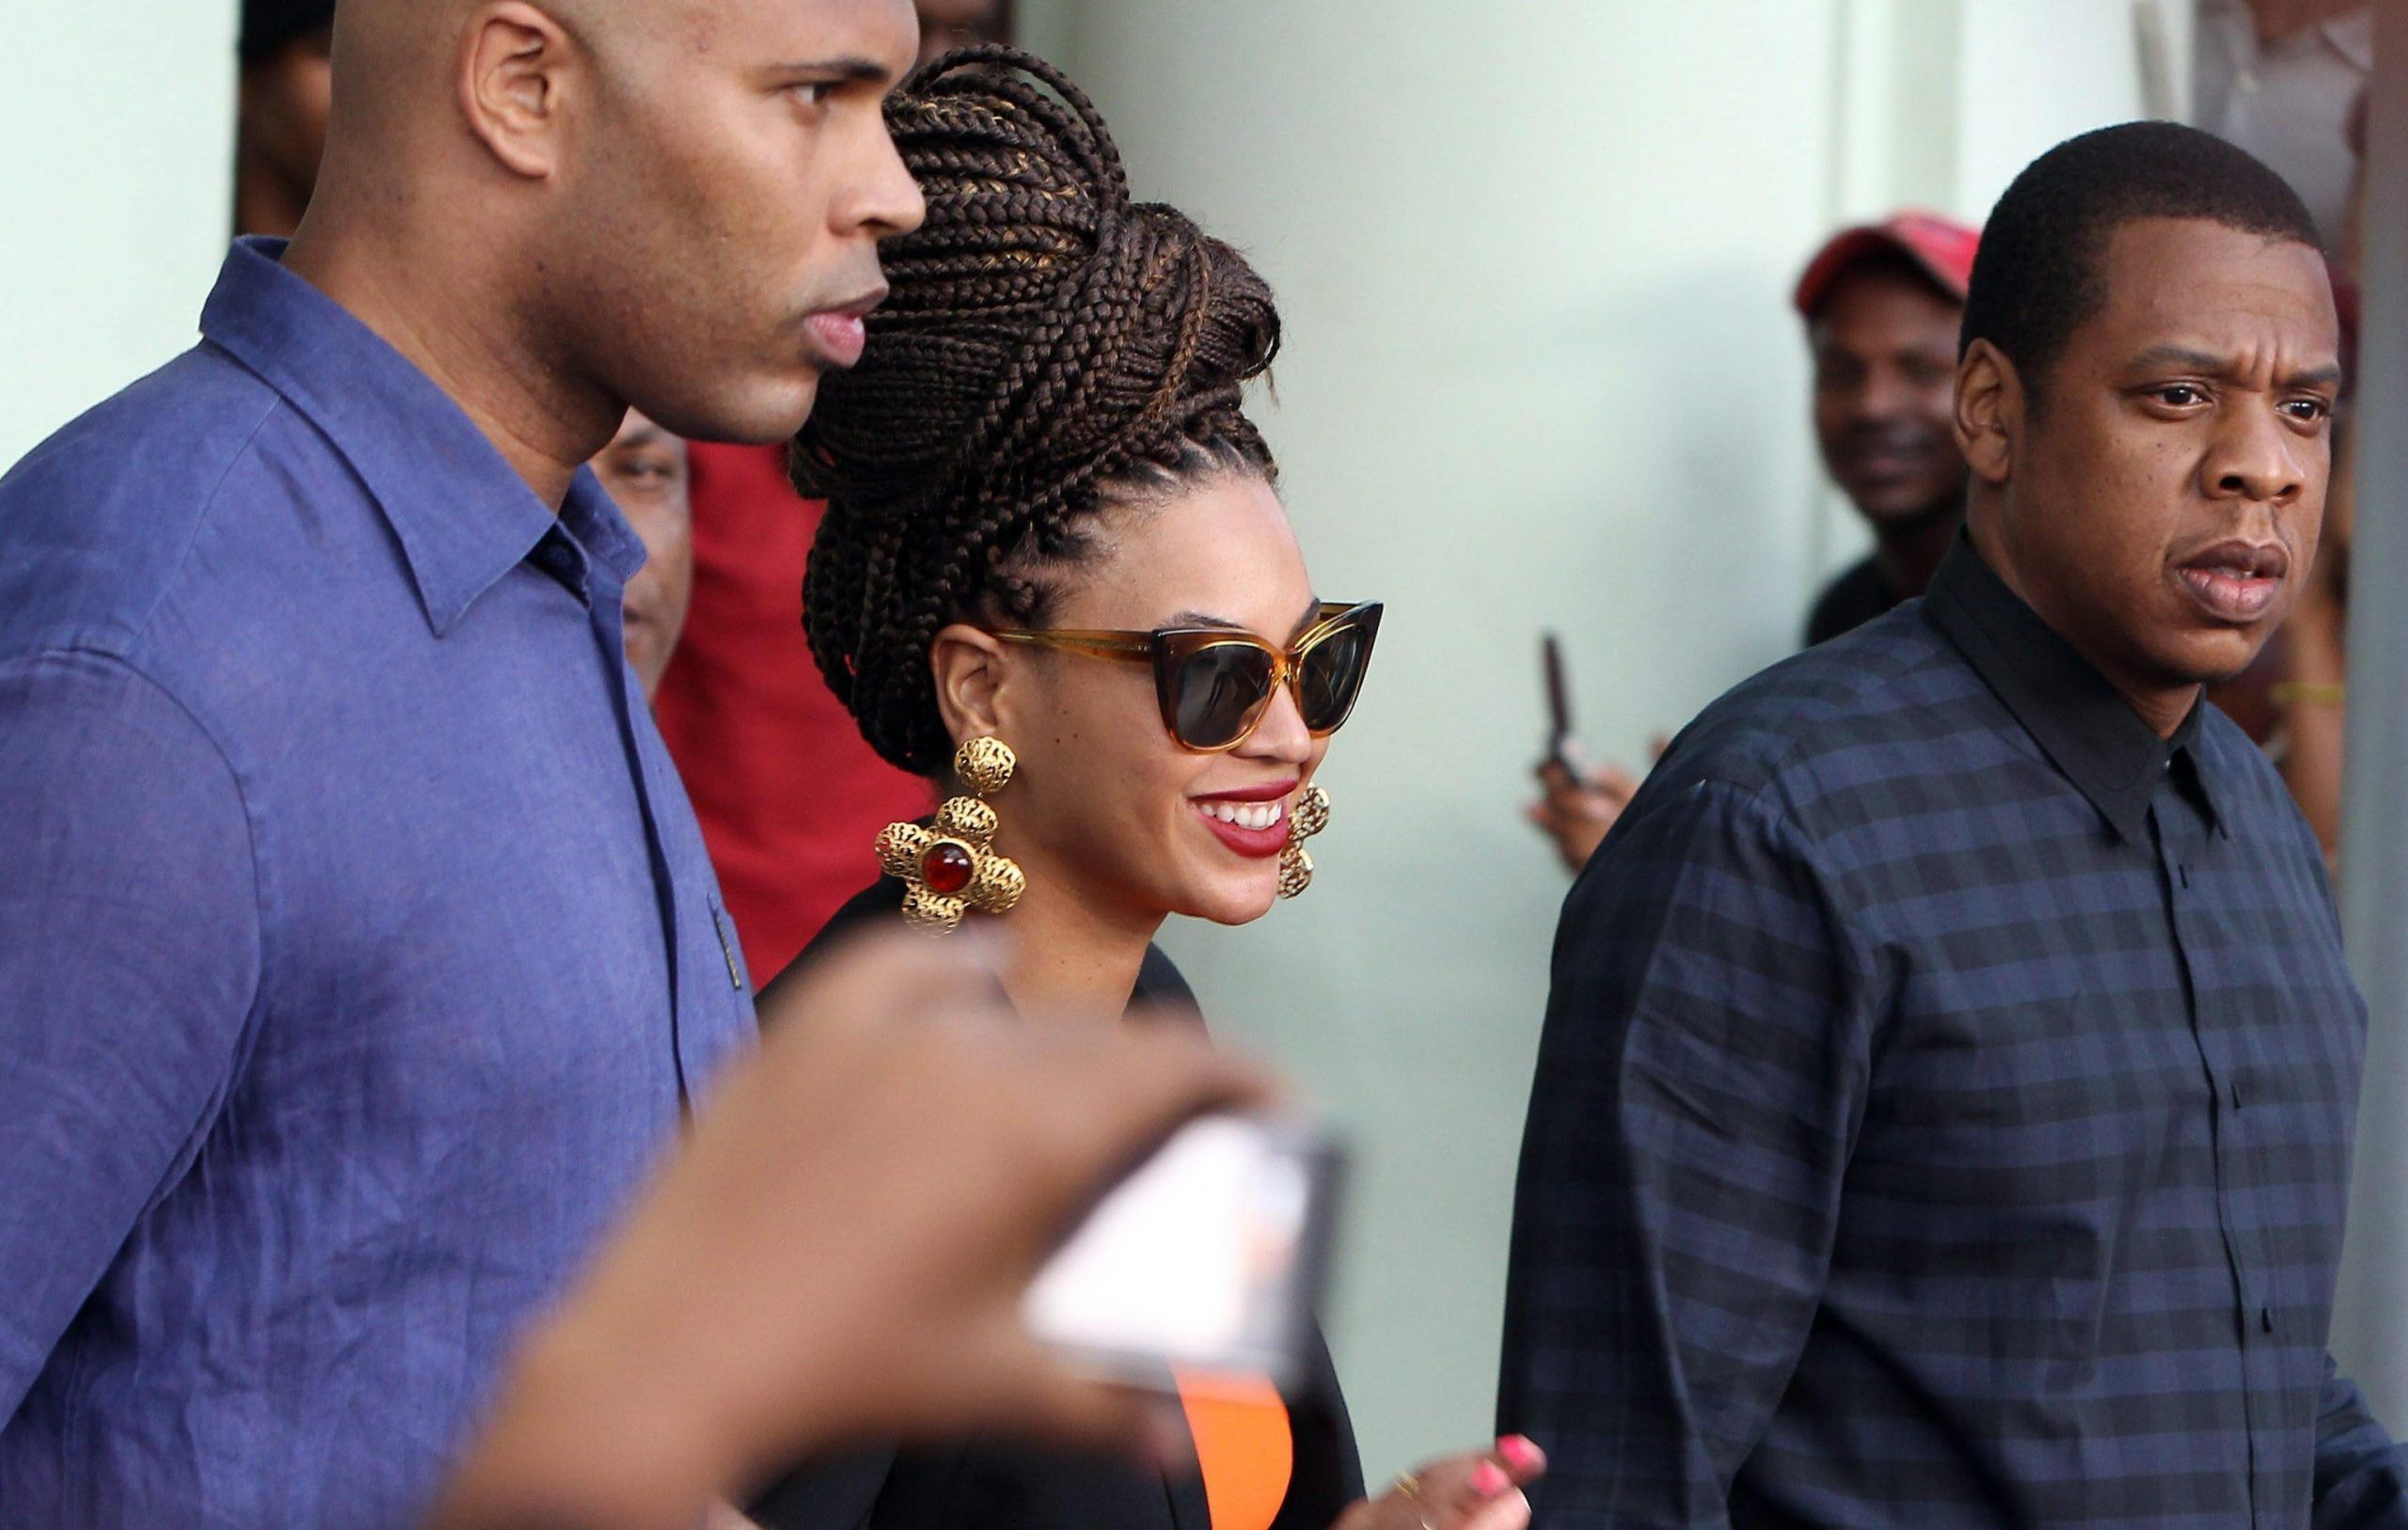 BEYONCE AND JAY Z CELEBRATE THEIR FIFTH ANNIVERSARY IN CUBA